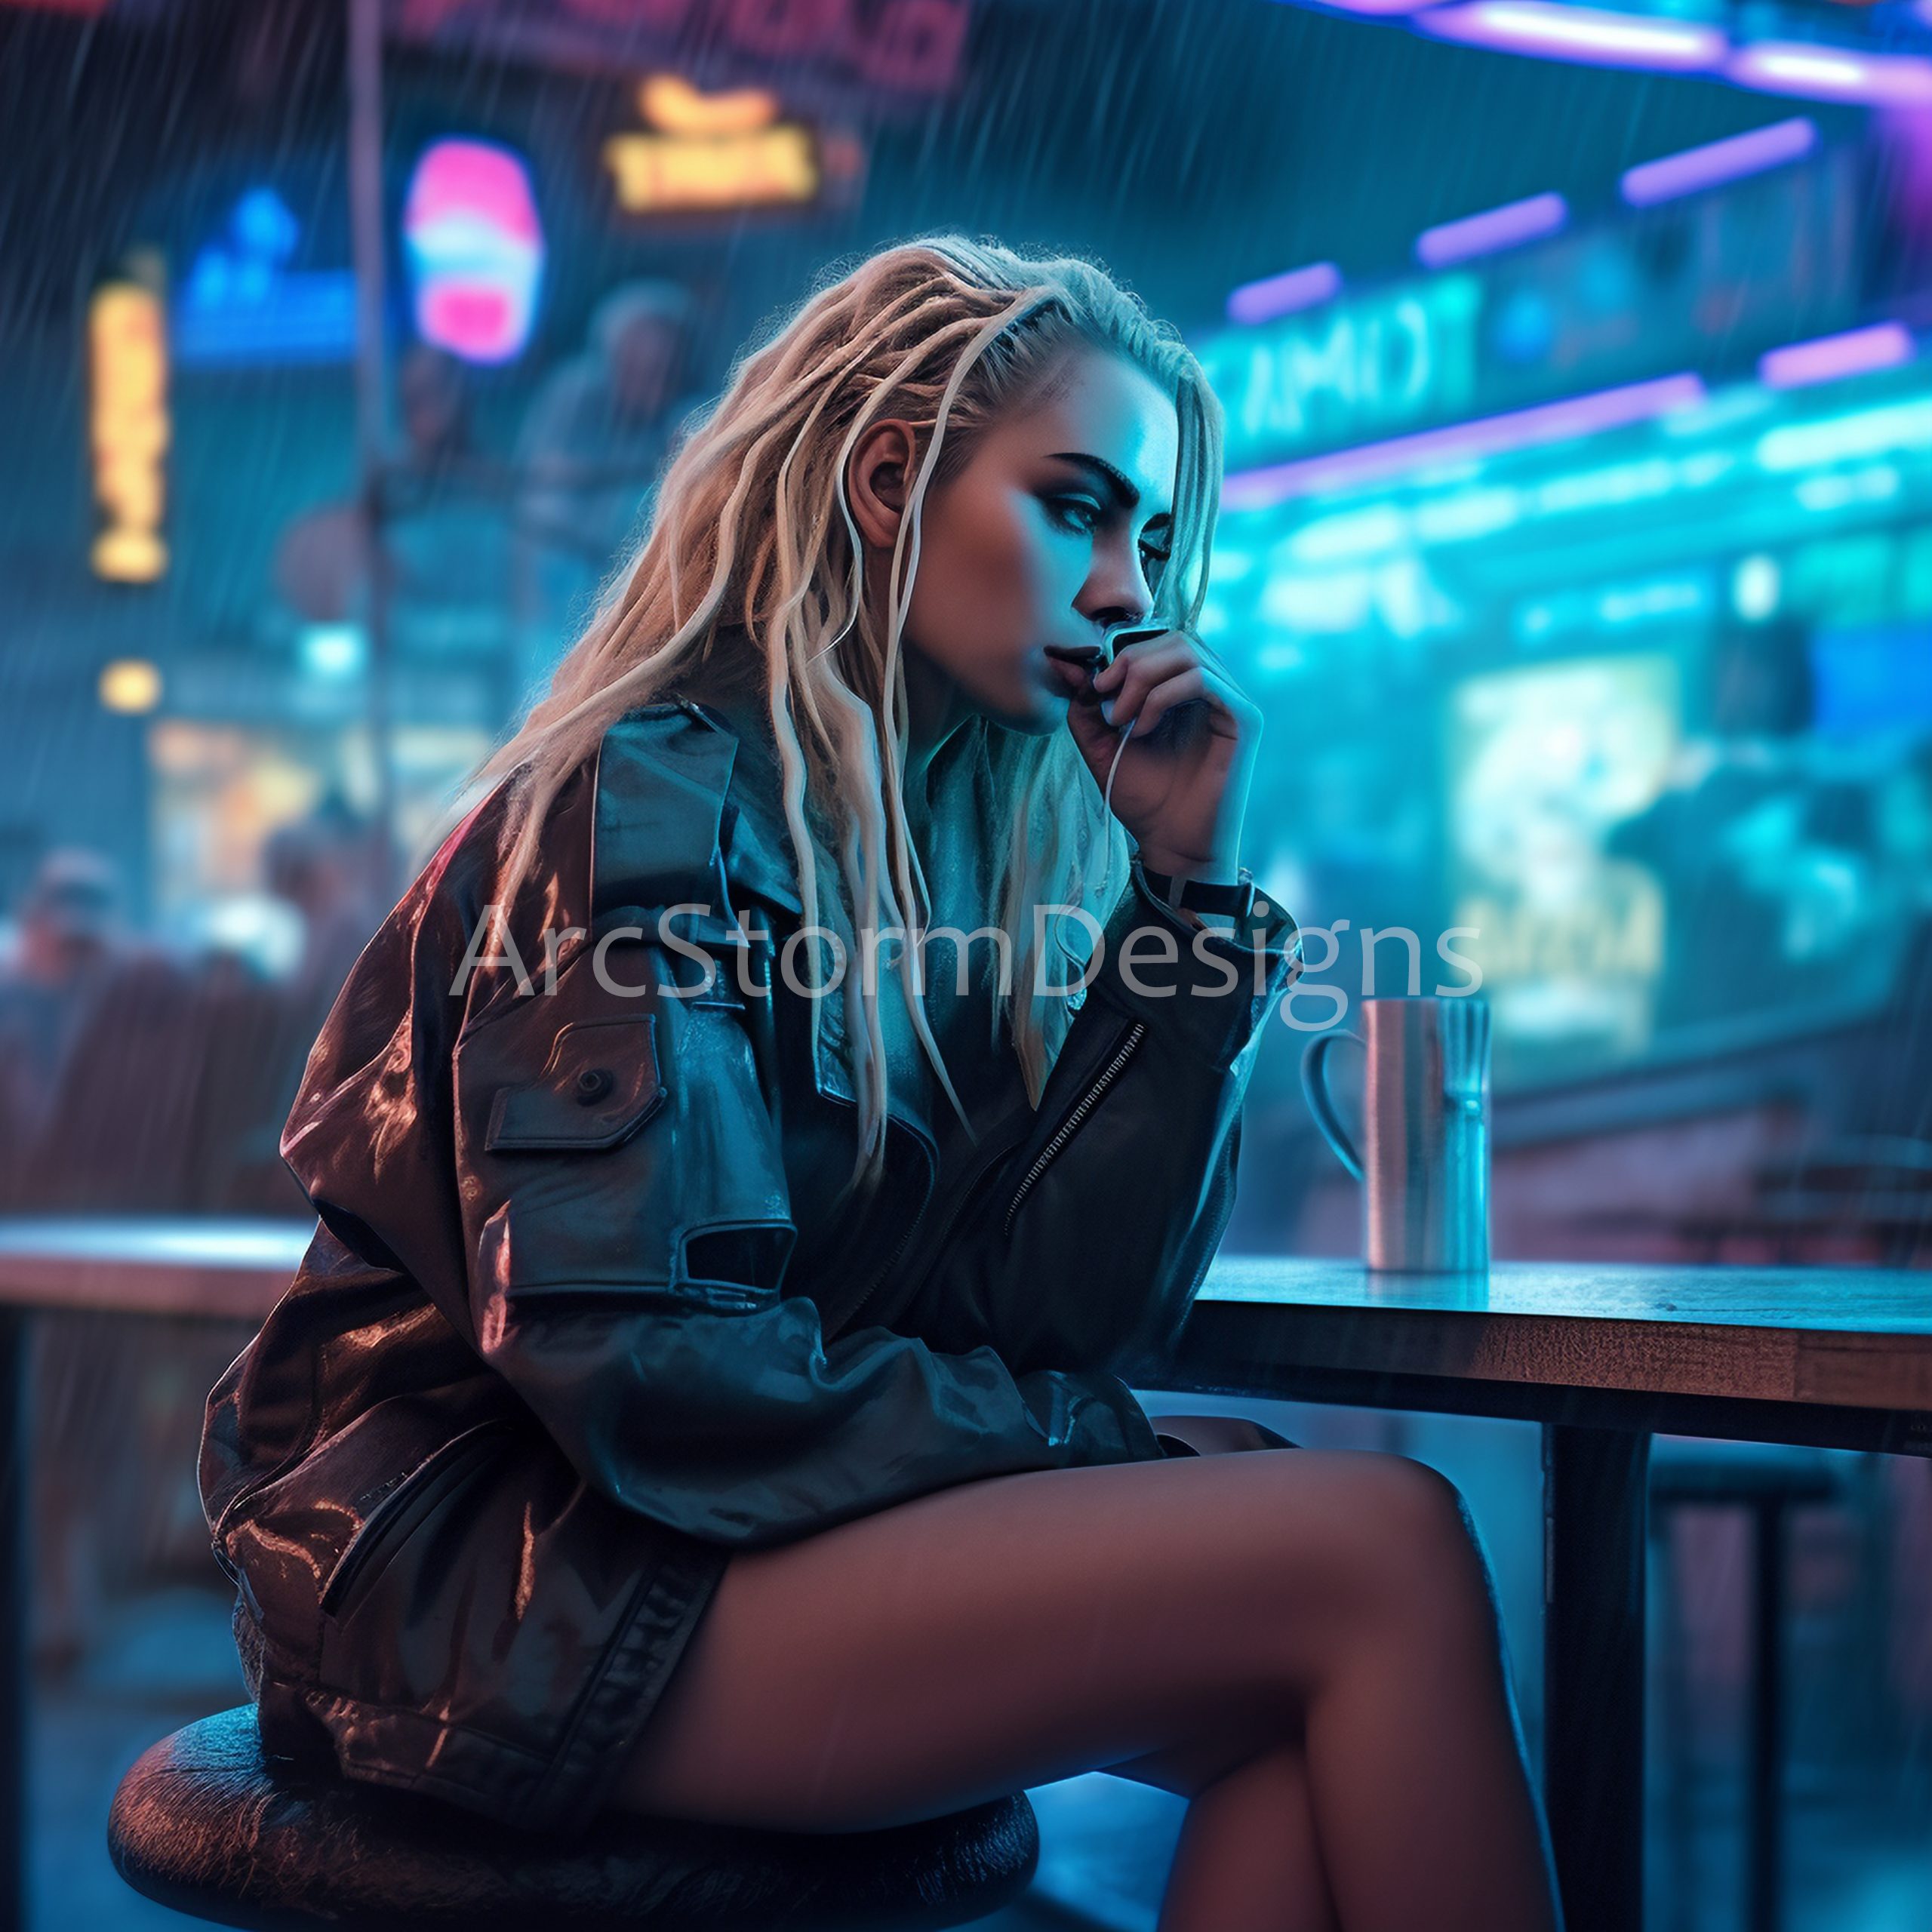 Alone in the Neon Night: A Cyberpunk's Anxiety